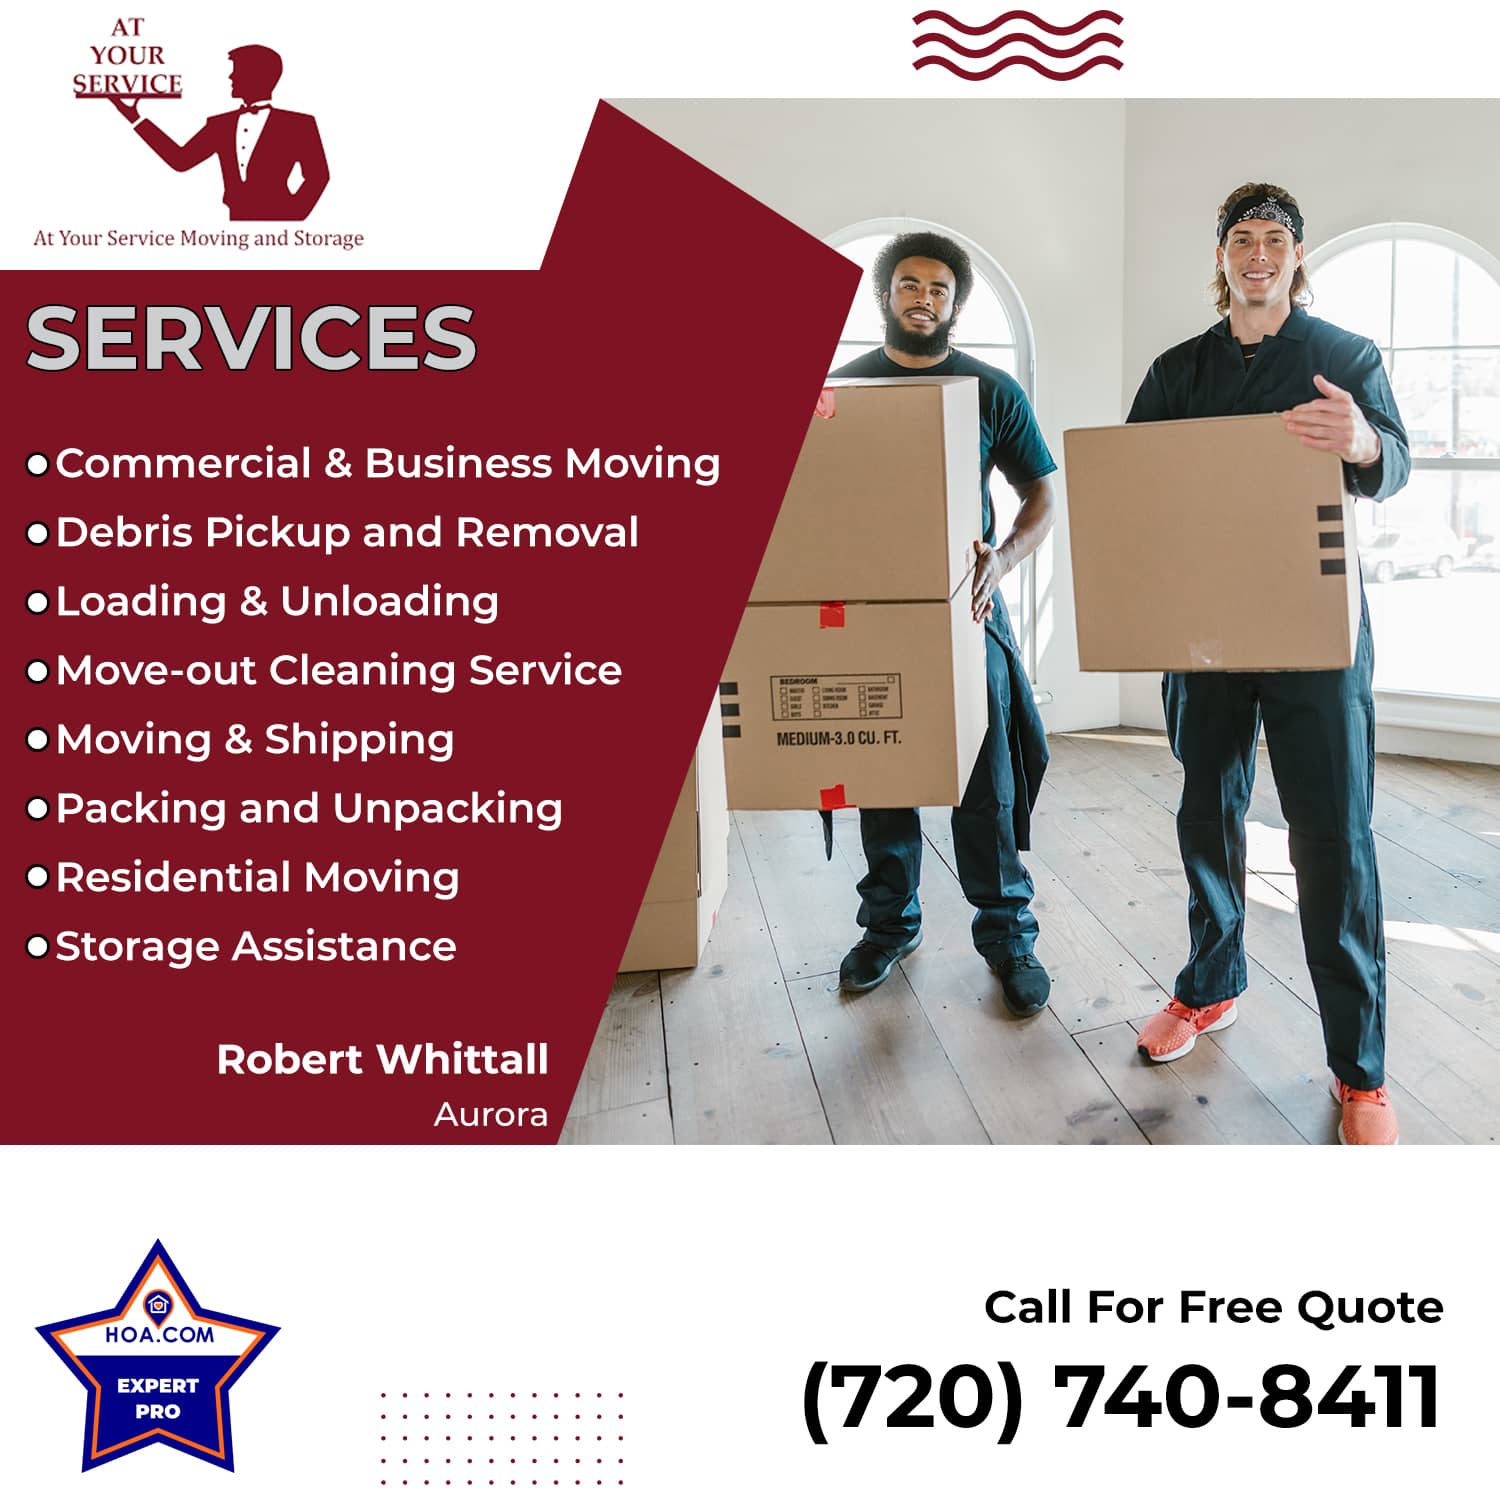 At Your Service - Services